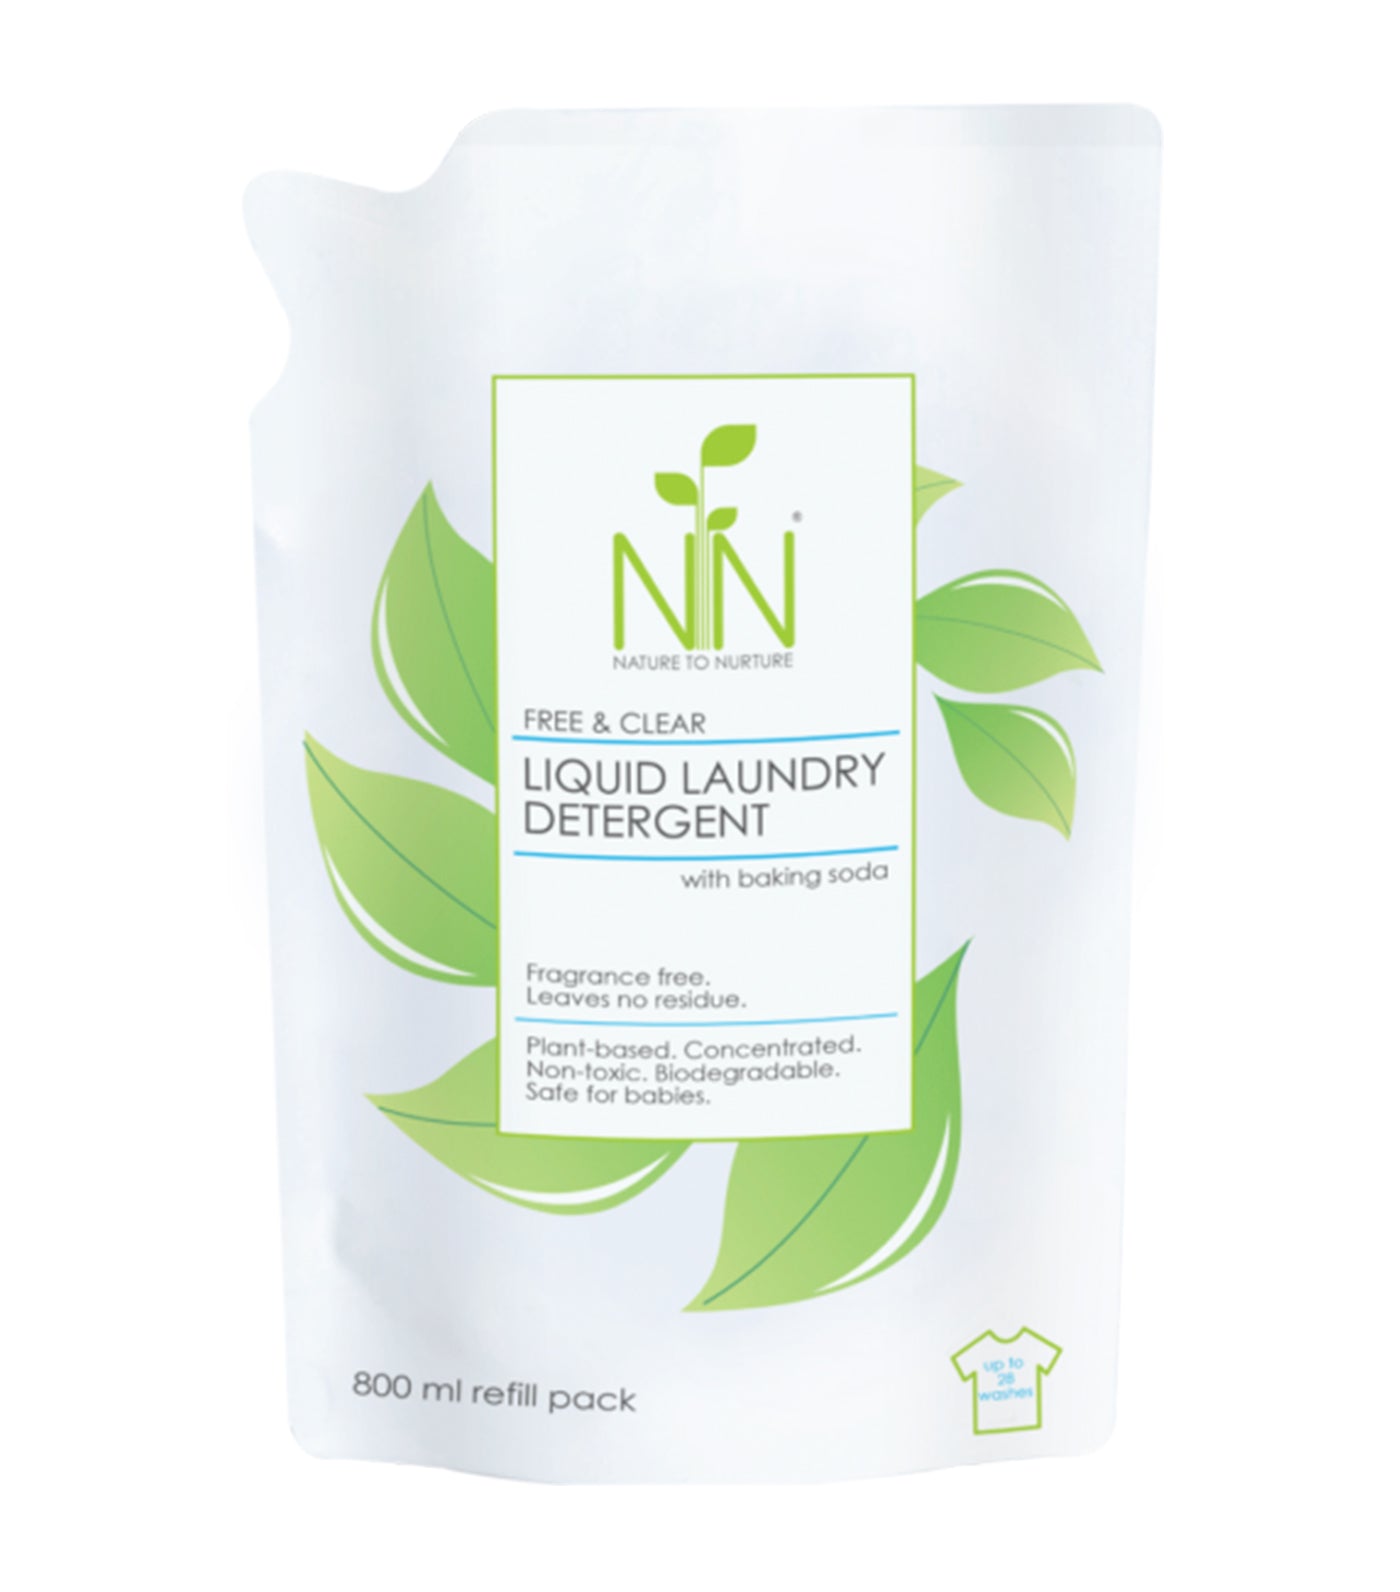 nature to nurture free and clear liquid laundry detergent 800ml refill